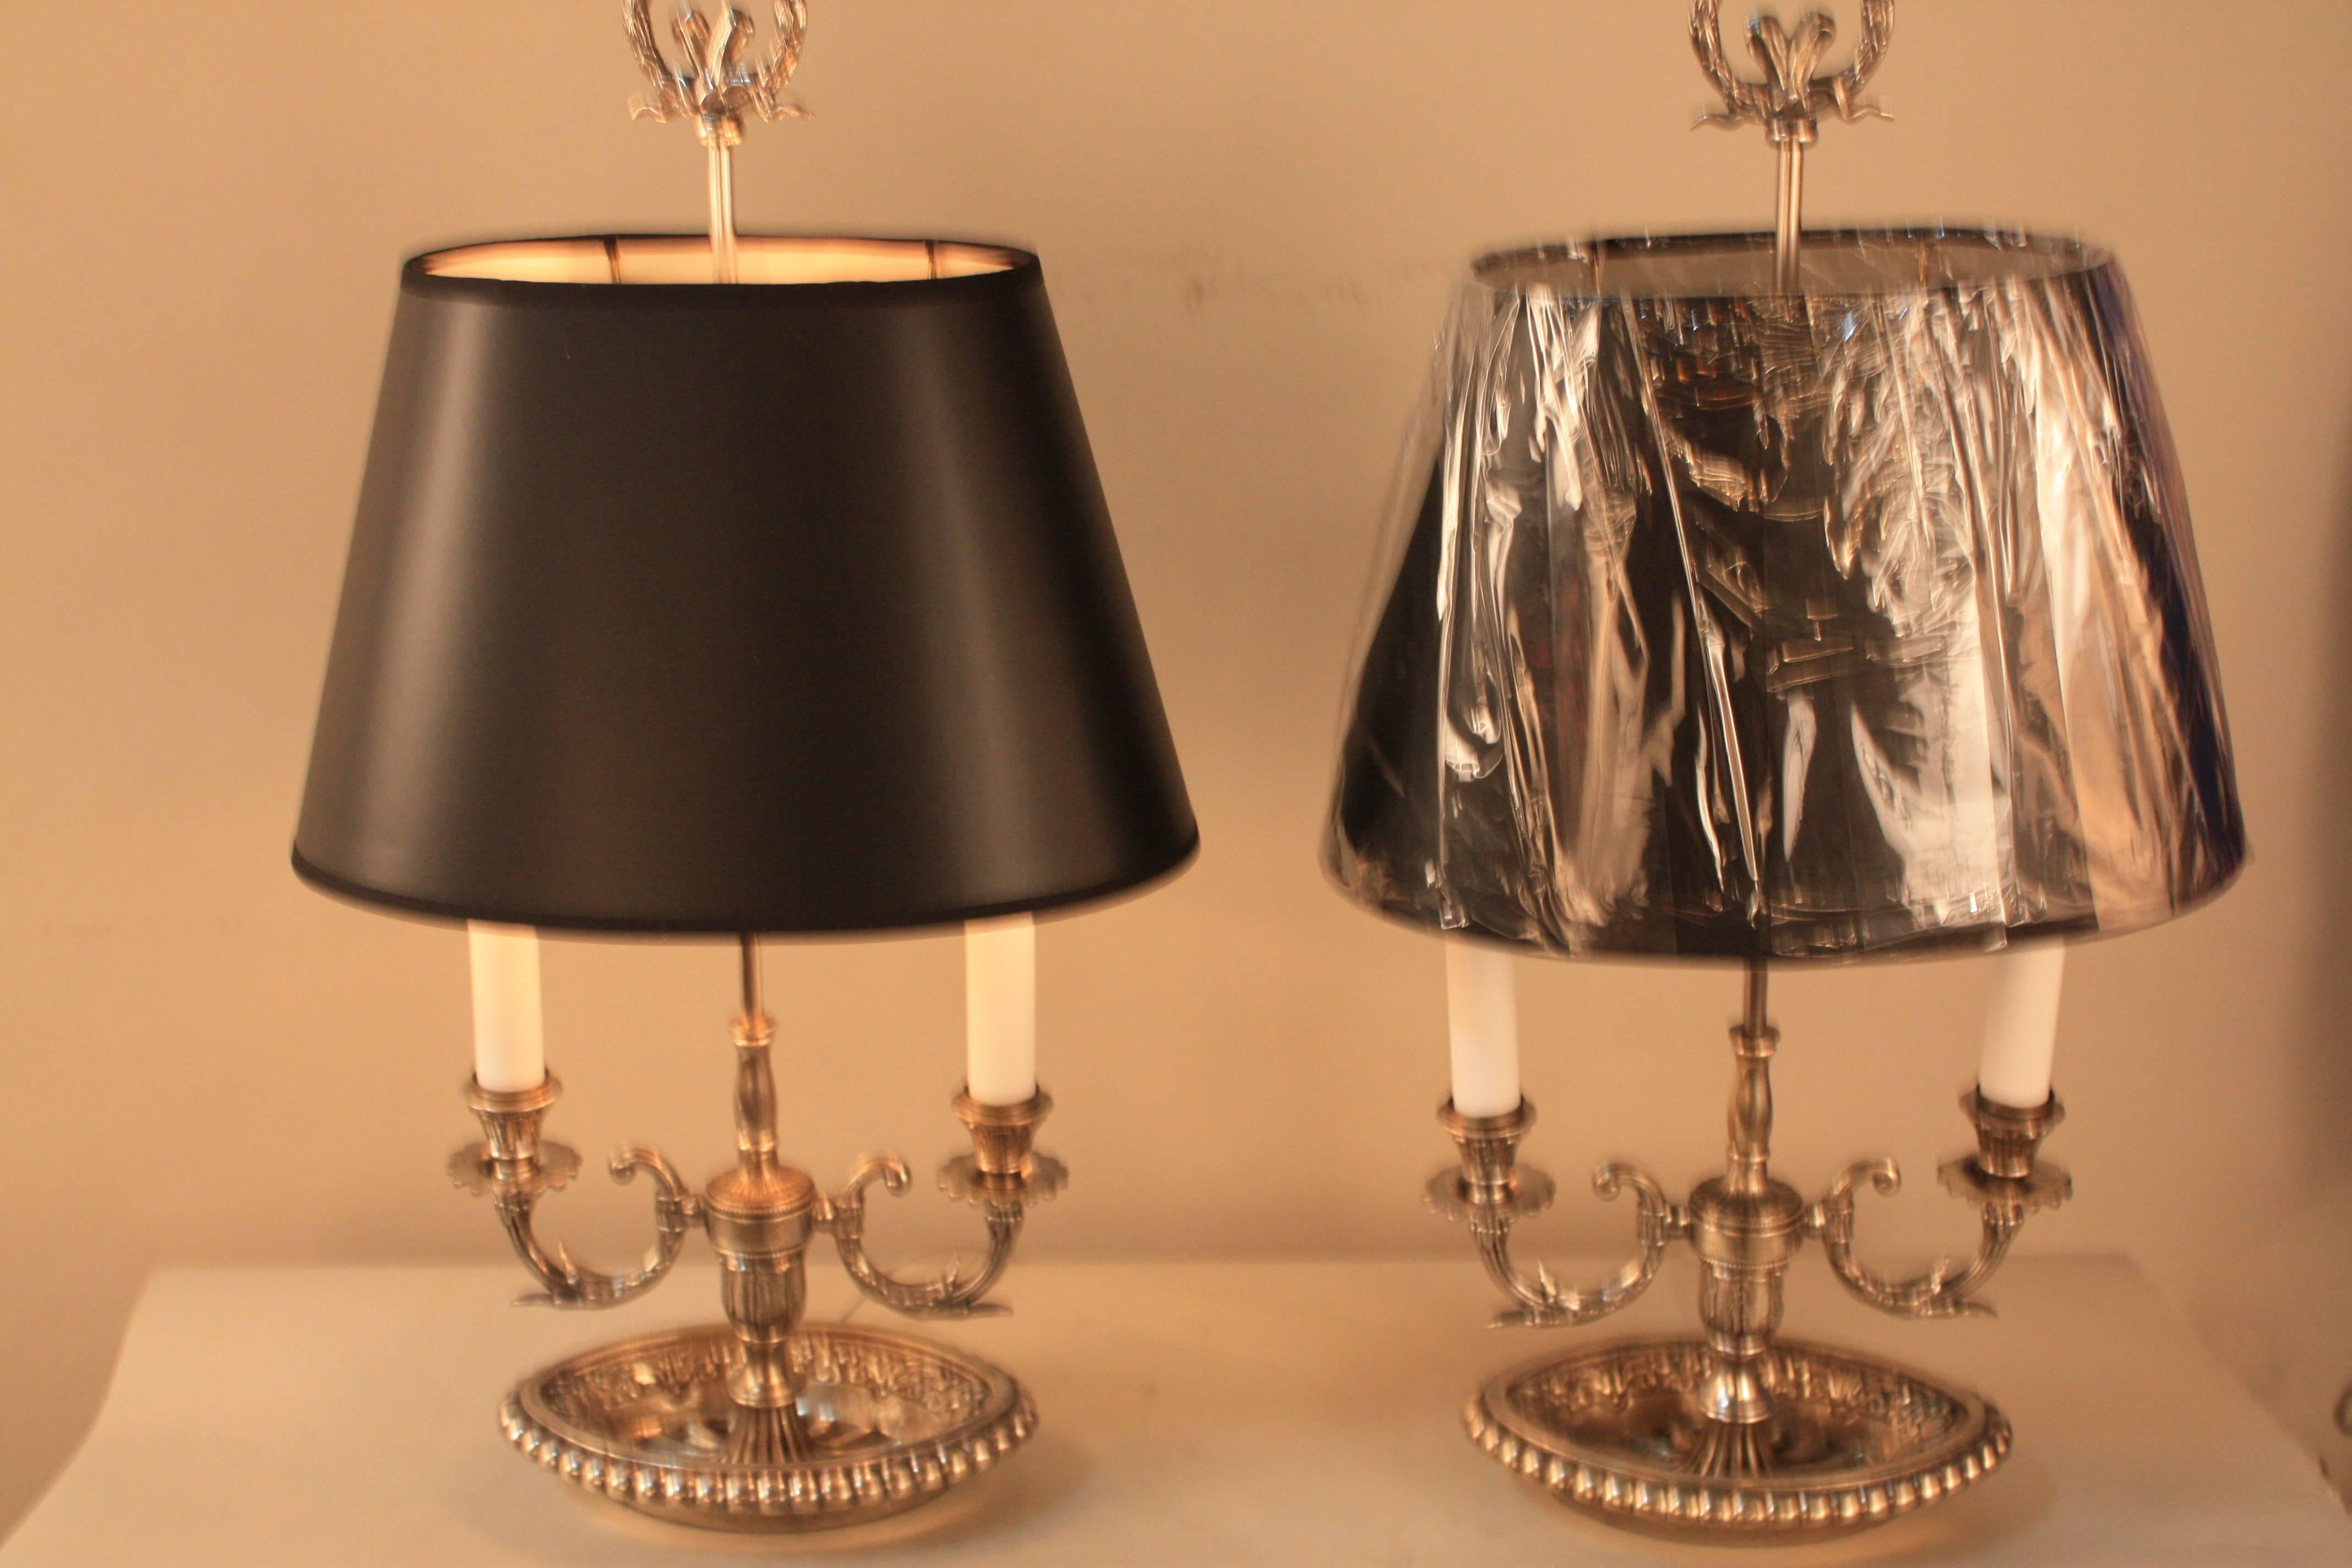 Wonderful pair of silver or nickel on bronze double light table lamps with black hardback lampshade.